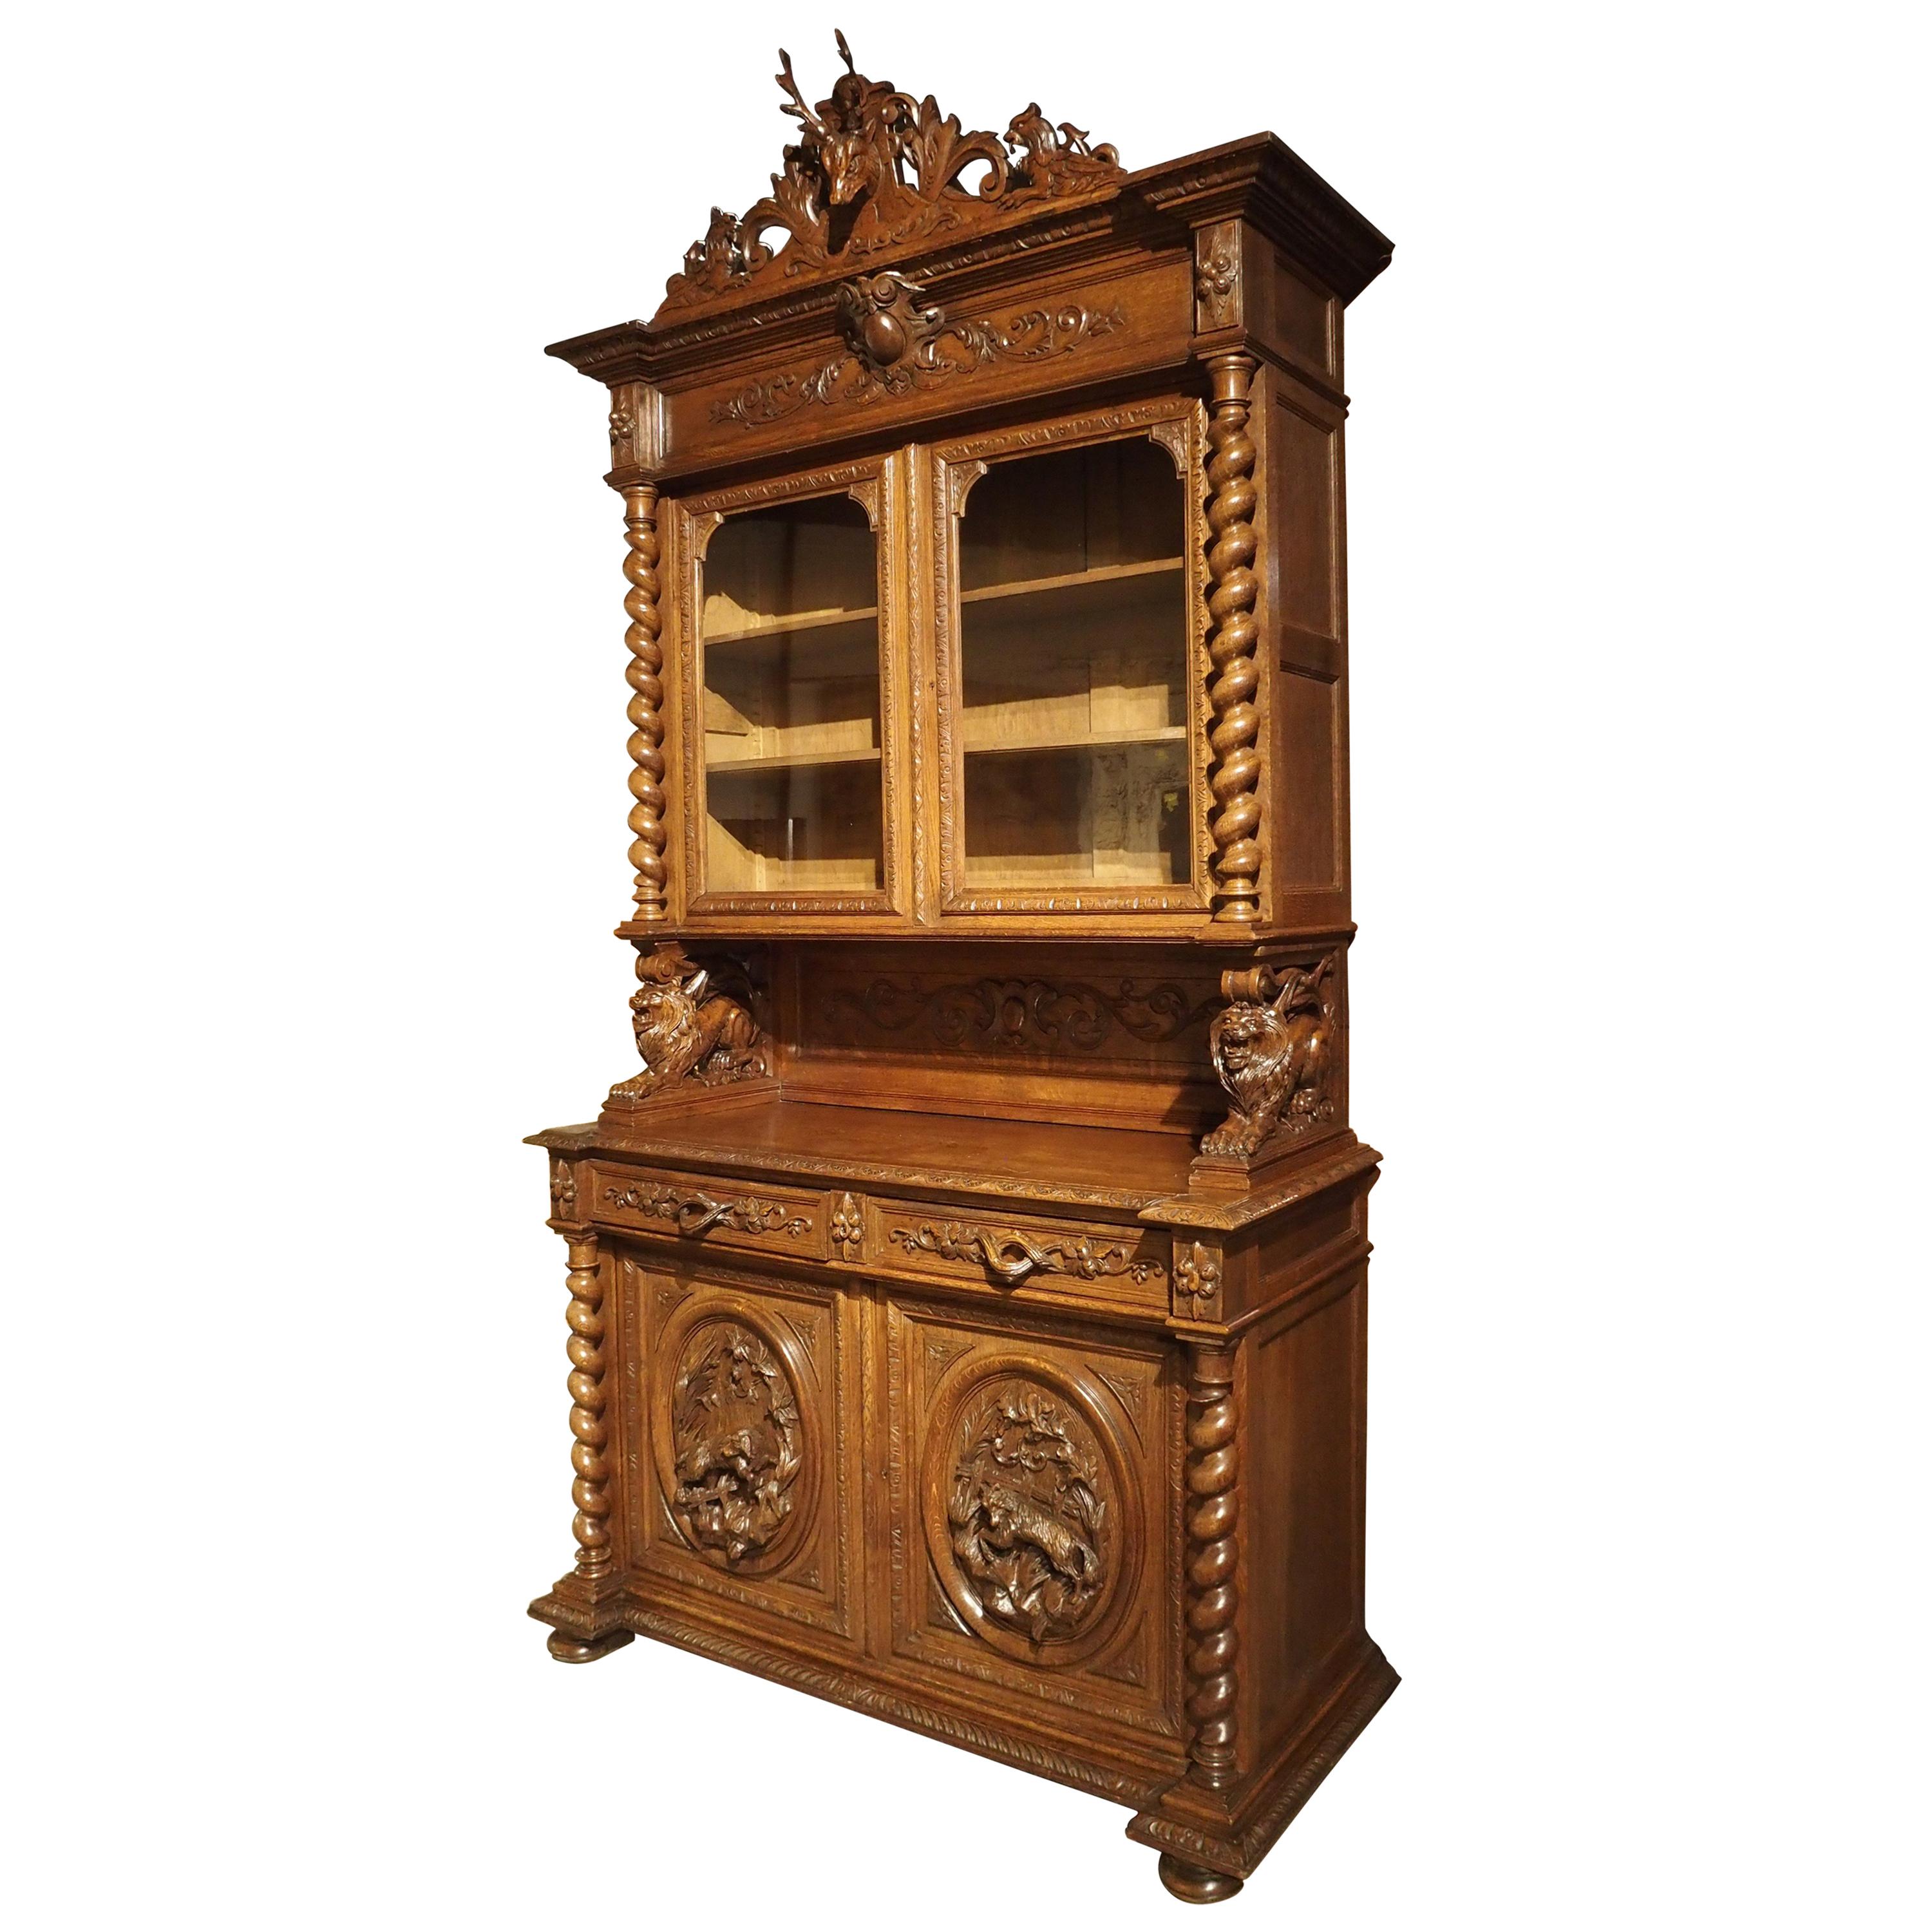 Antique French Oak Black Forest Style Cabinet with Deer Trophy, 19th Century